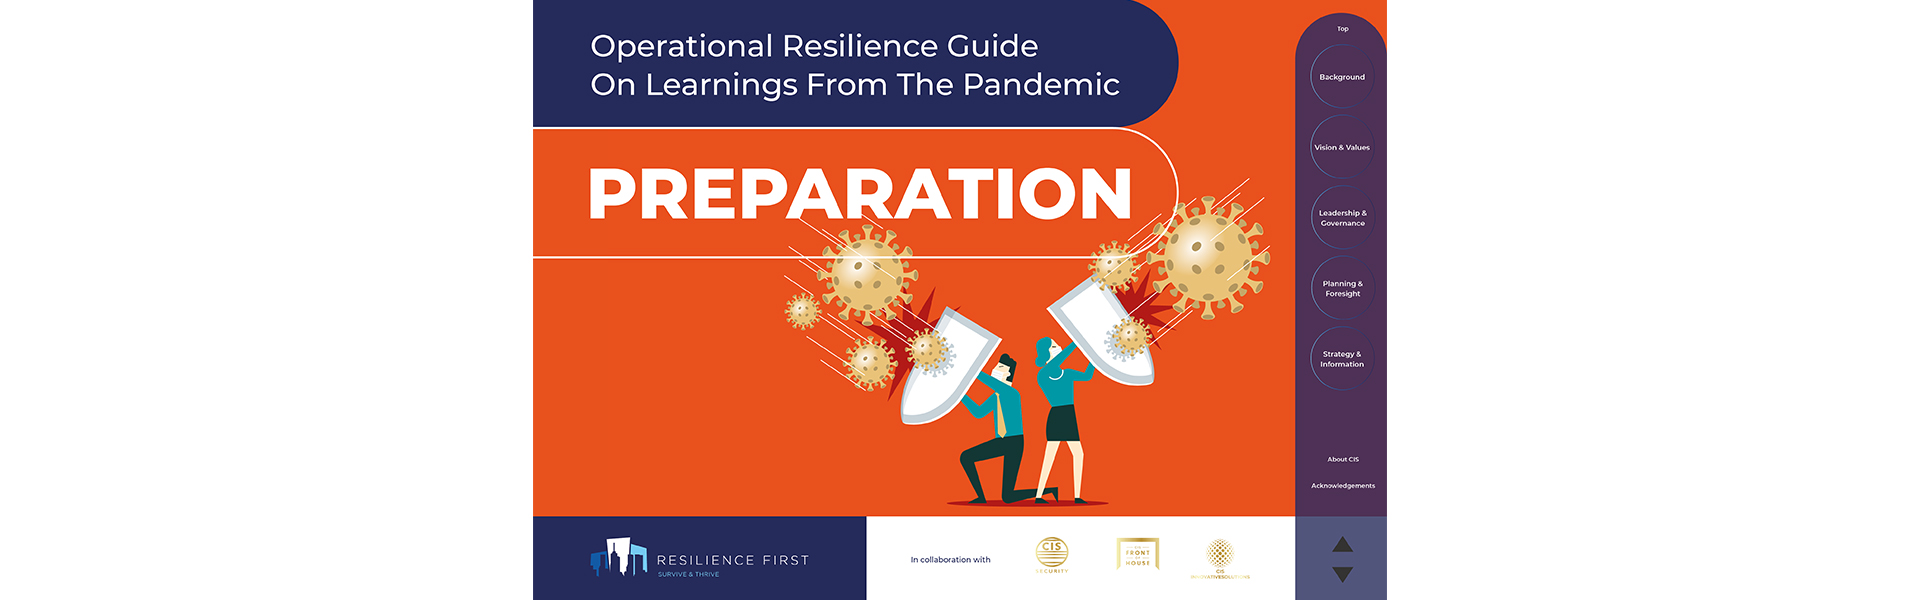 Operational Resilience Guide - Preparation